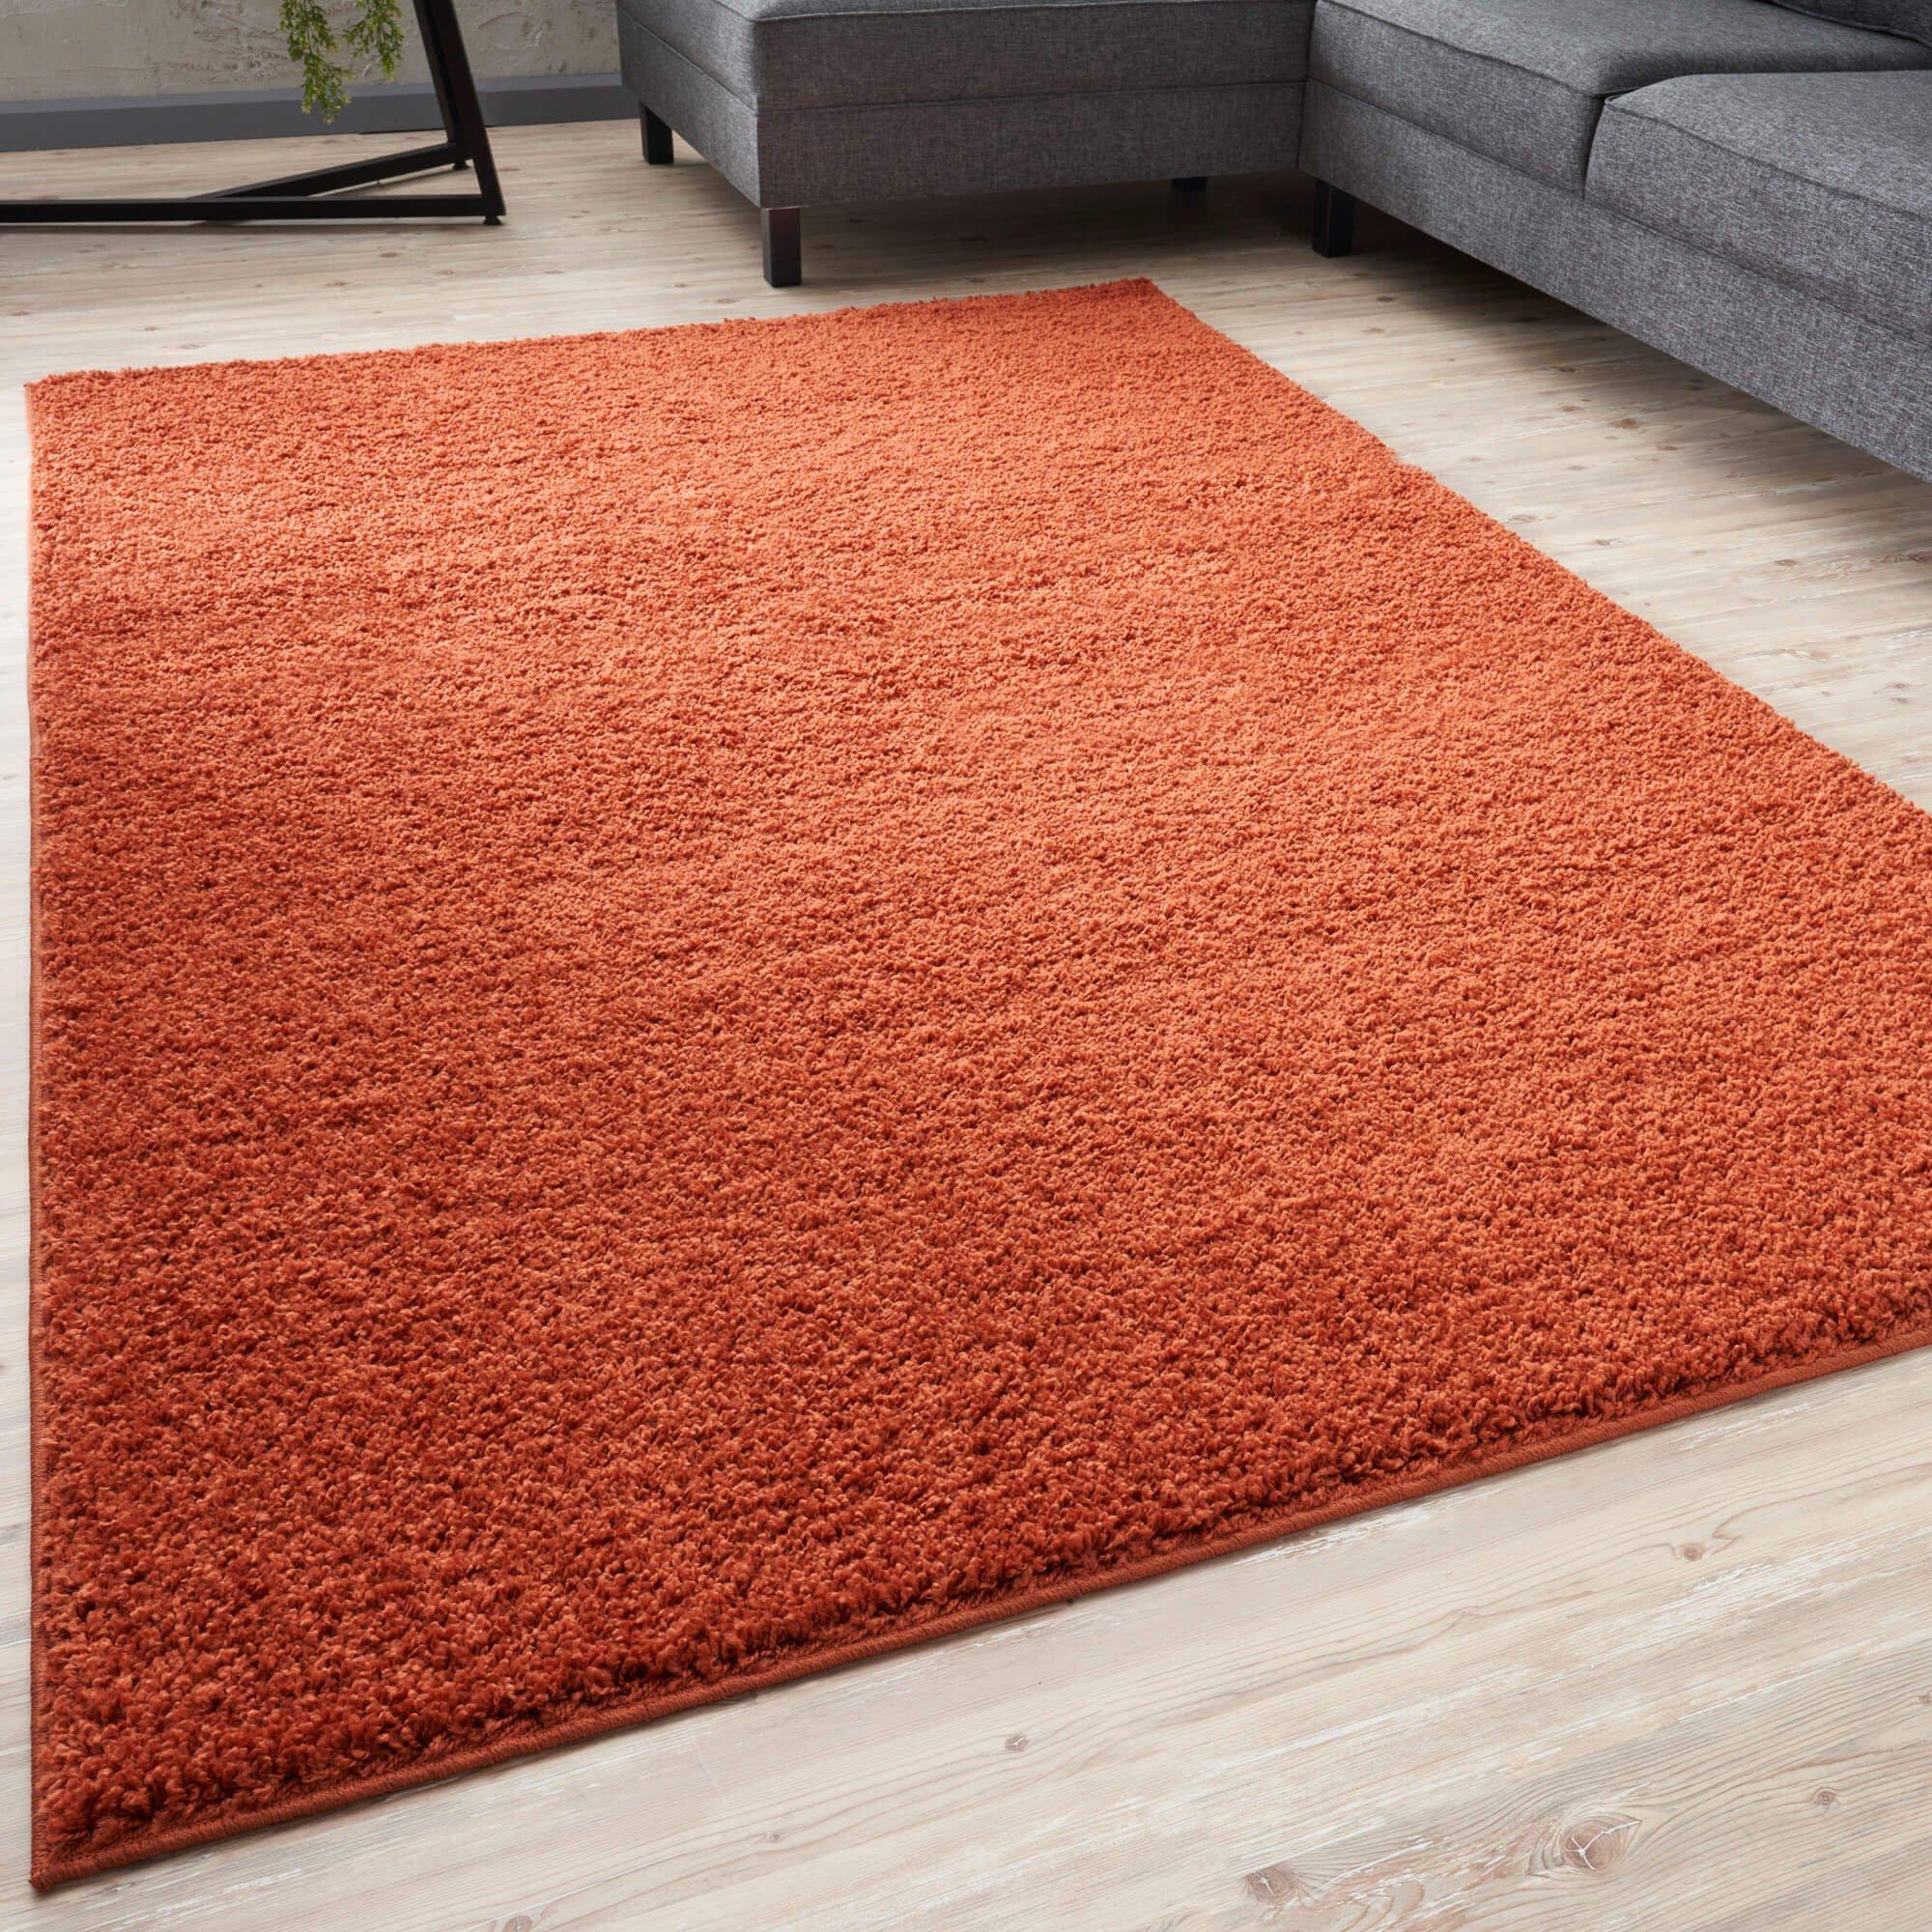 Myshaggy Collection Rugs Solid Design in Terracotta